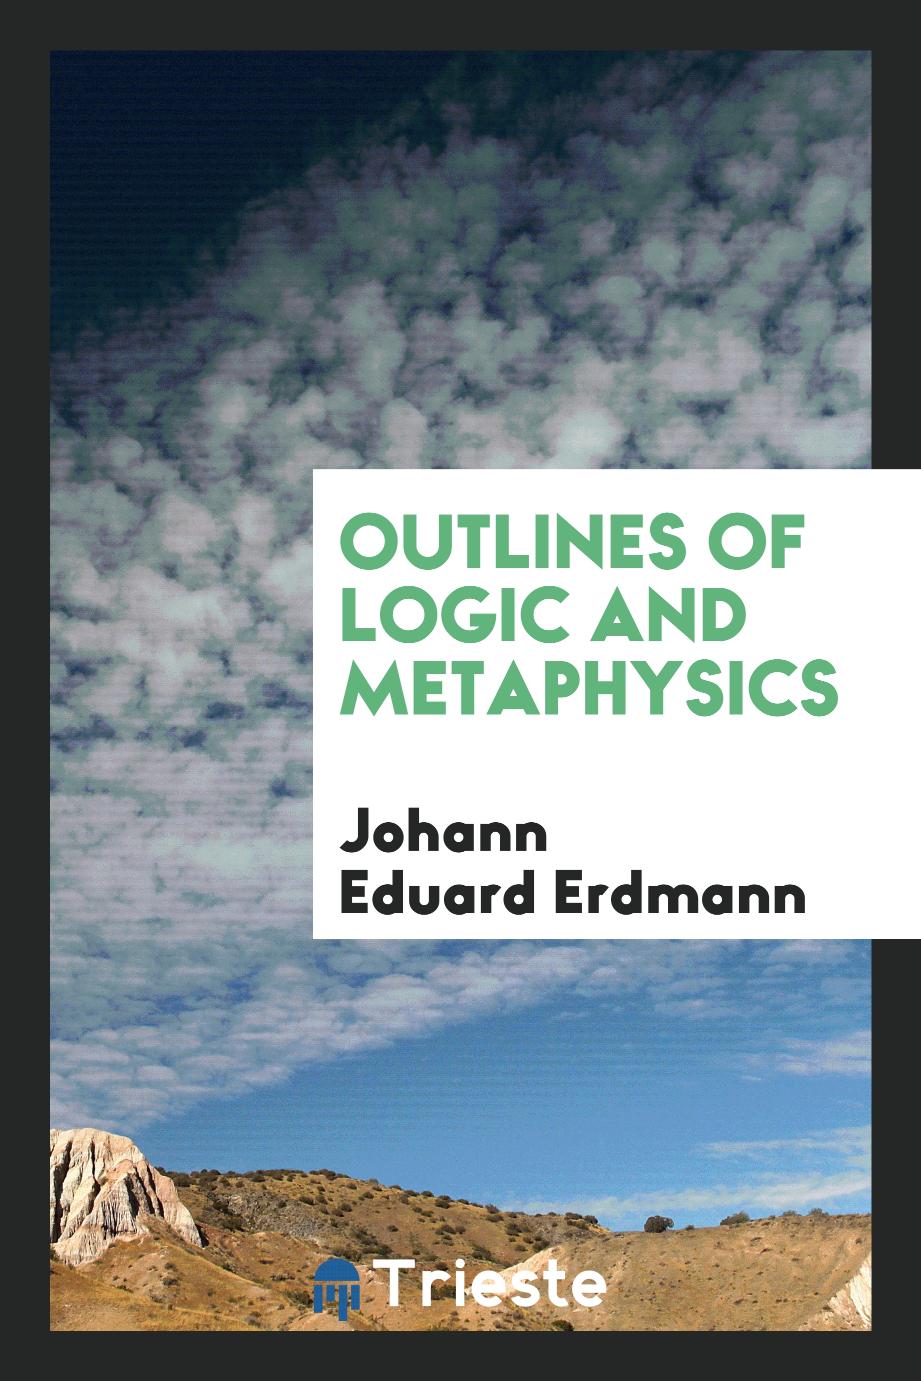 Outlines of logic and metaphysics